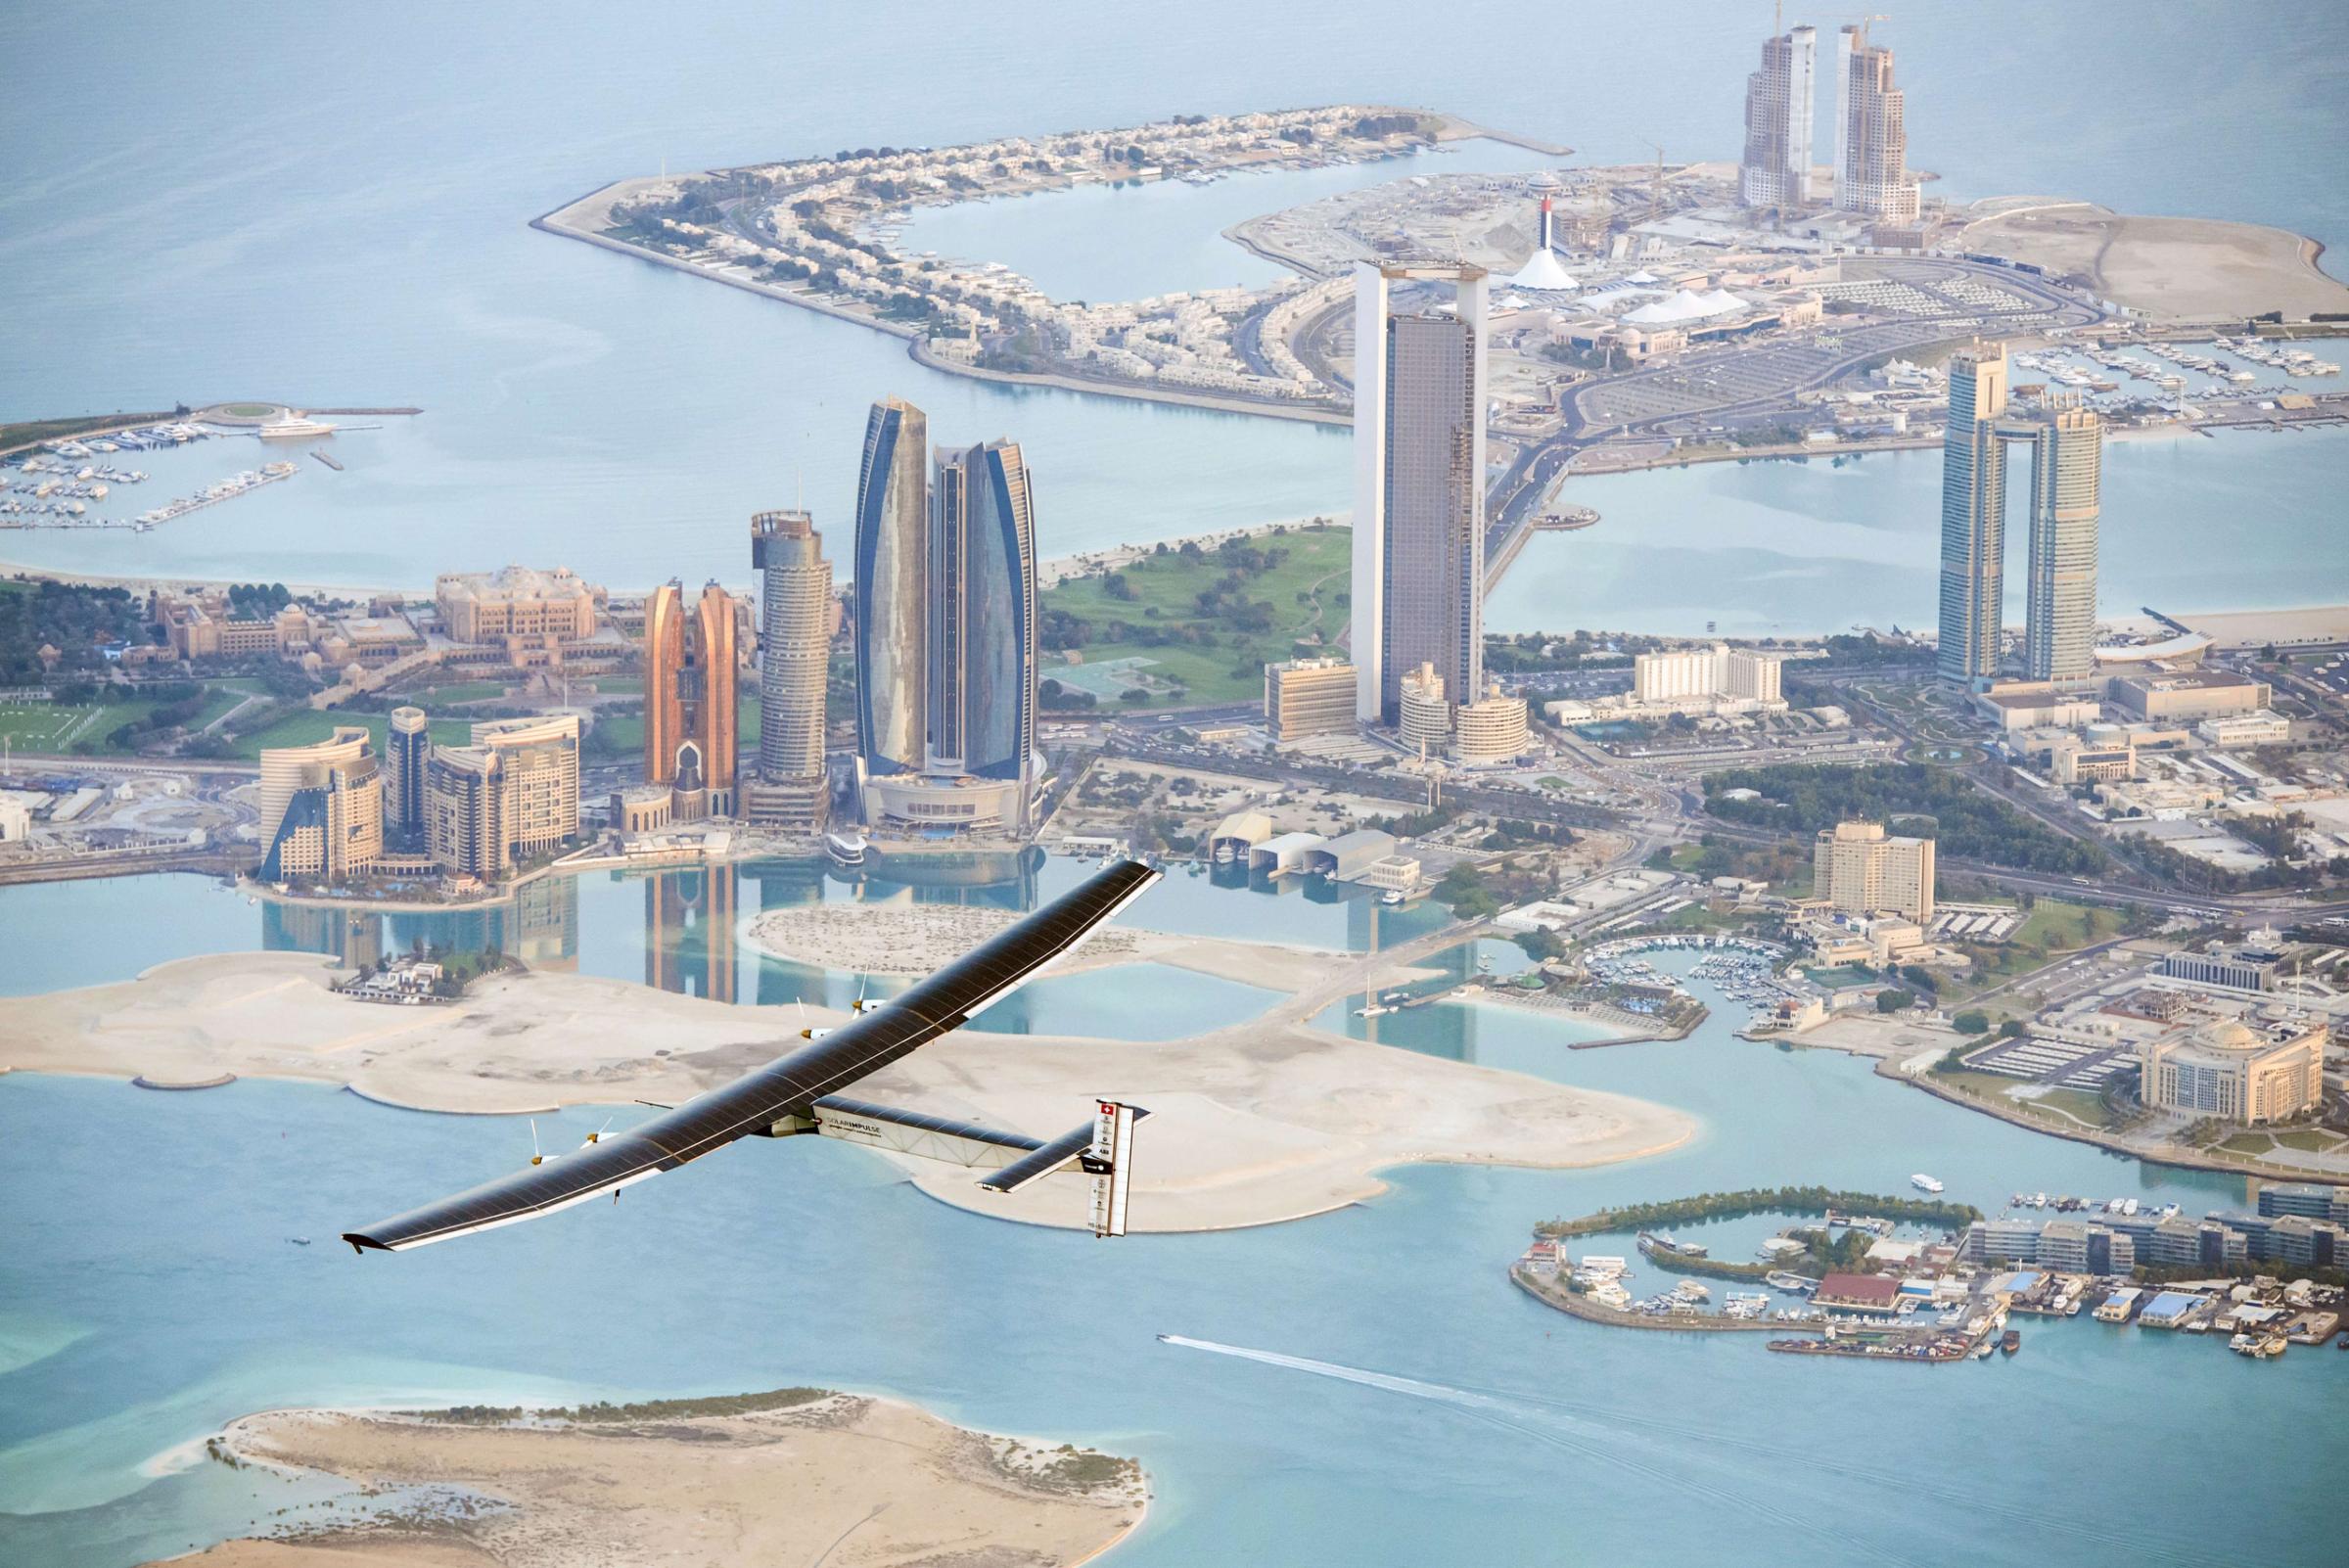 Solar Impulse 2 flies over the Emirati capital Abu Dhabi on Feb. 26, 2015 ahead of a planned round-the-world tour to promote alternative energy.